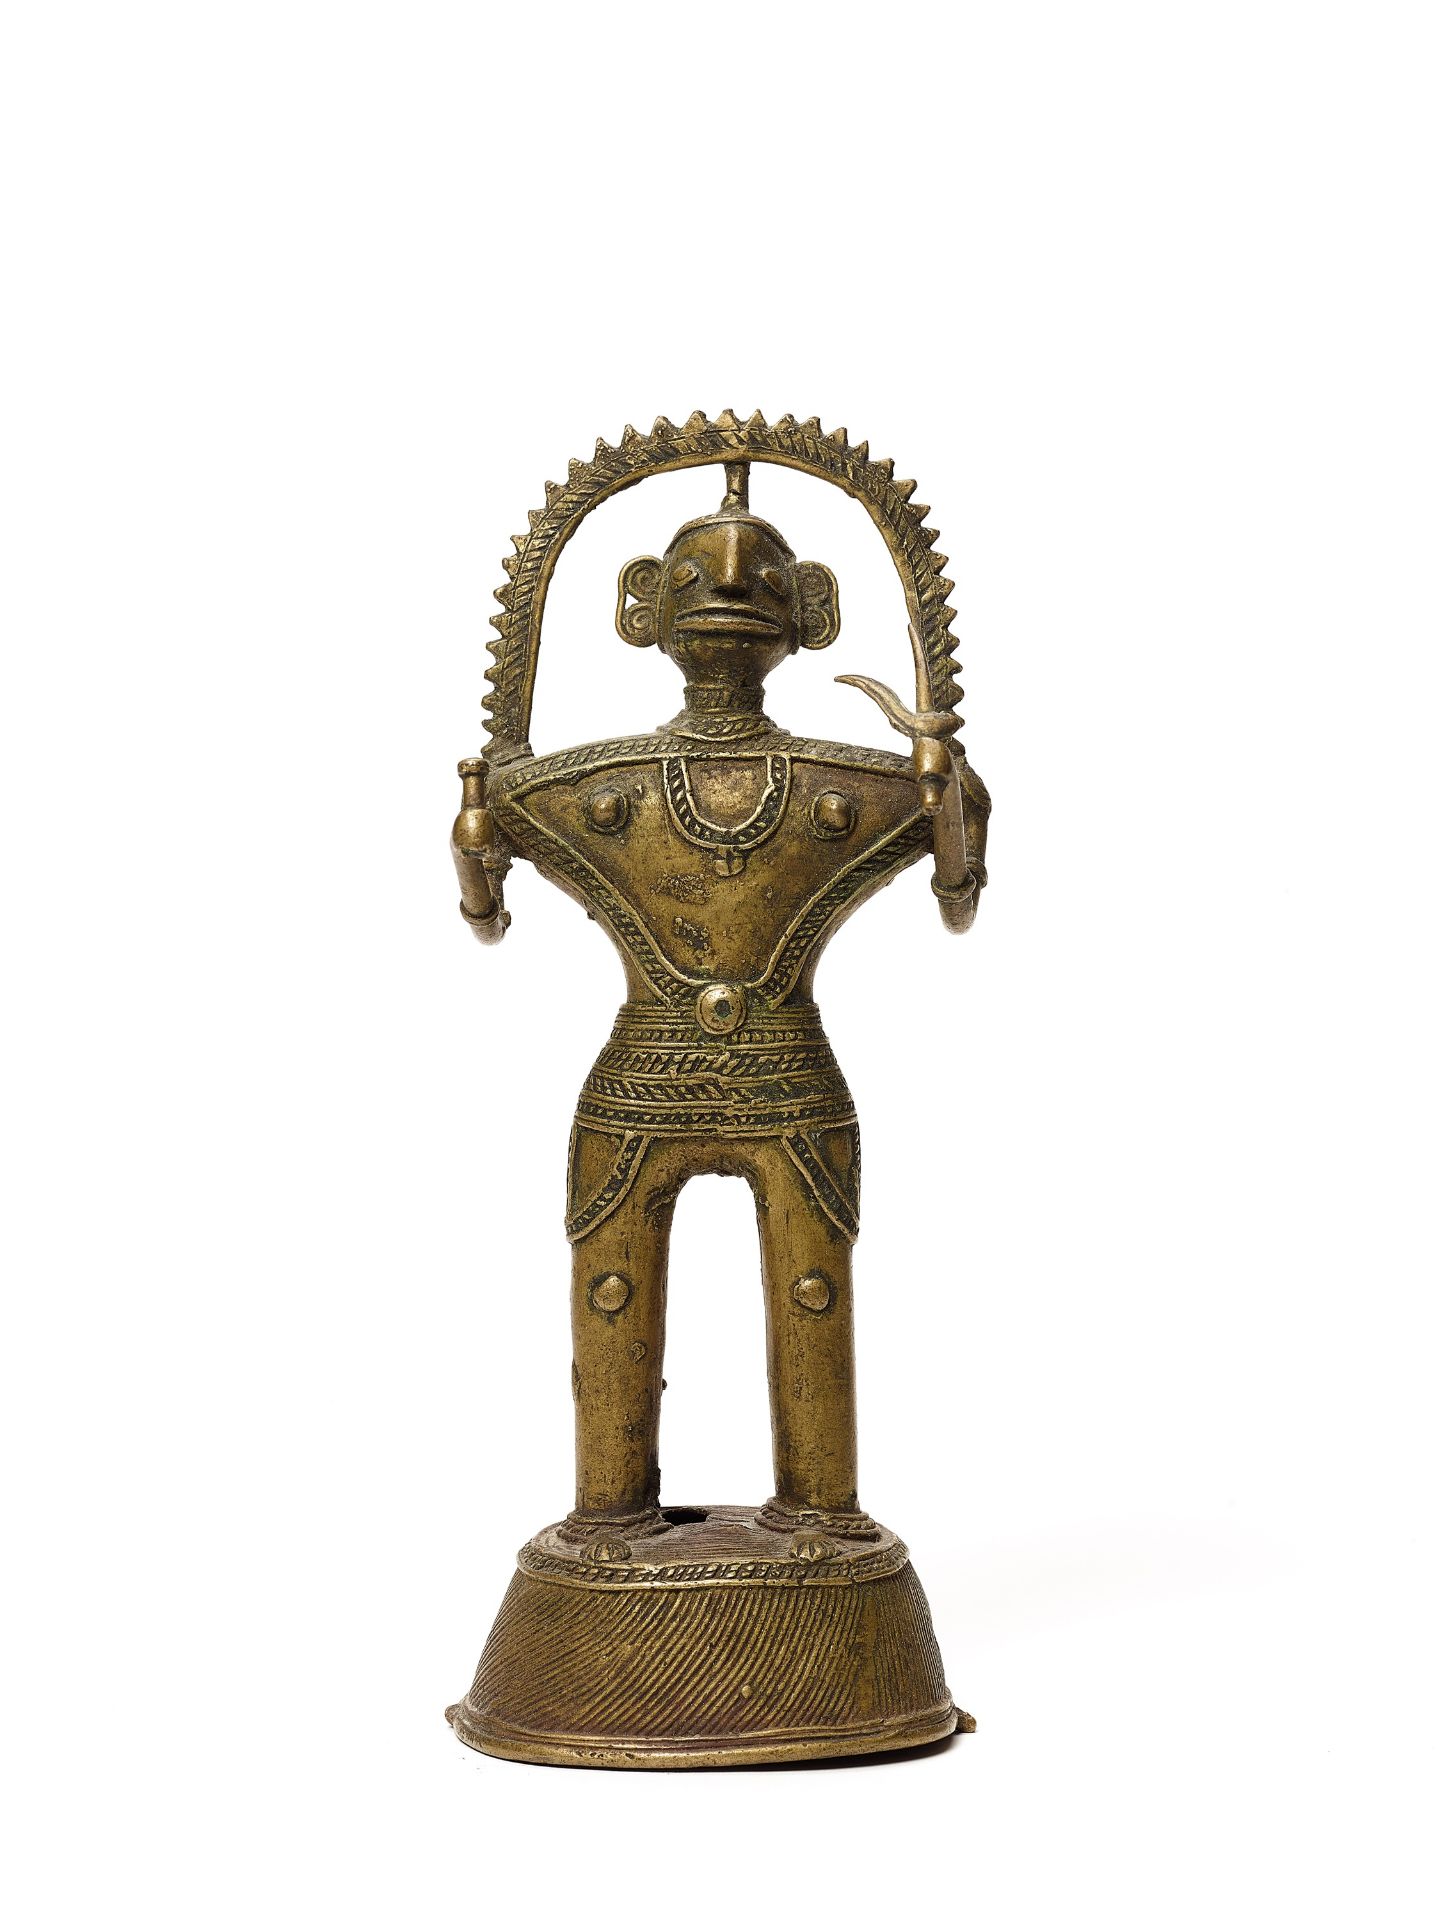 A BASTAR BRONZE OF A GODDESS WITH A TRIDENT AND SCEPTRE